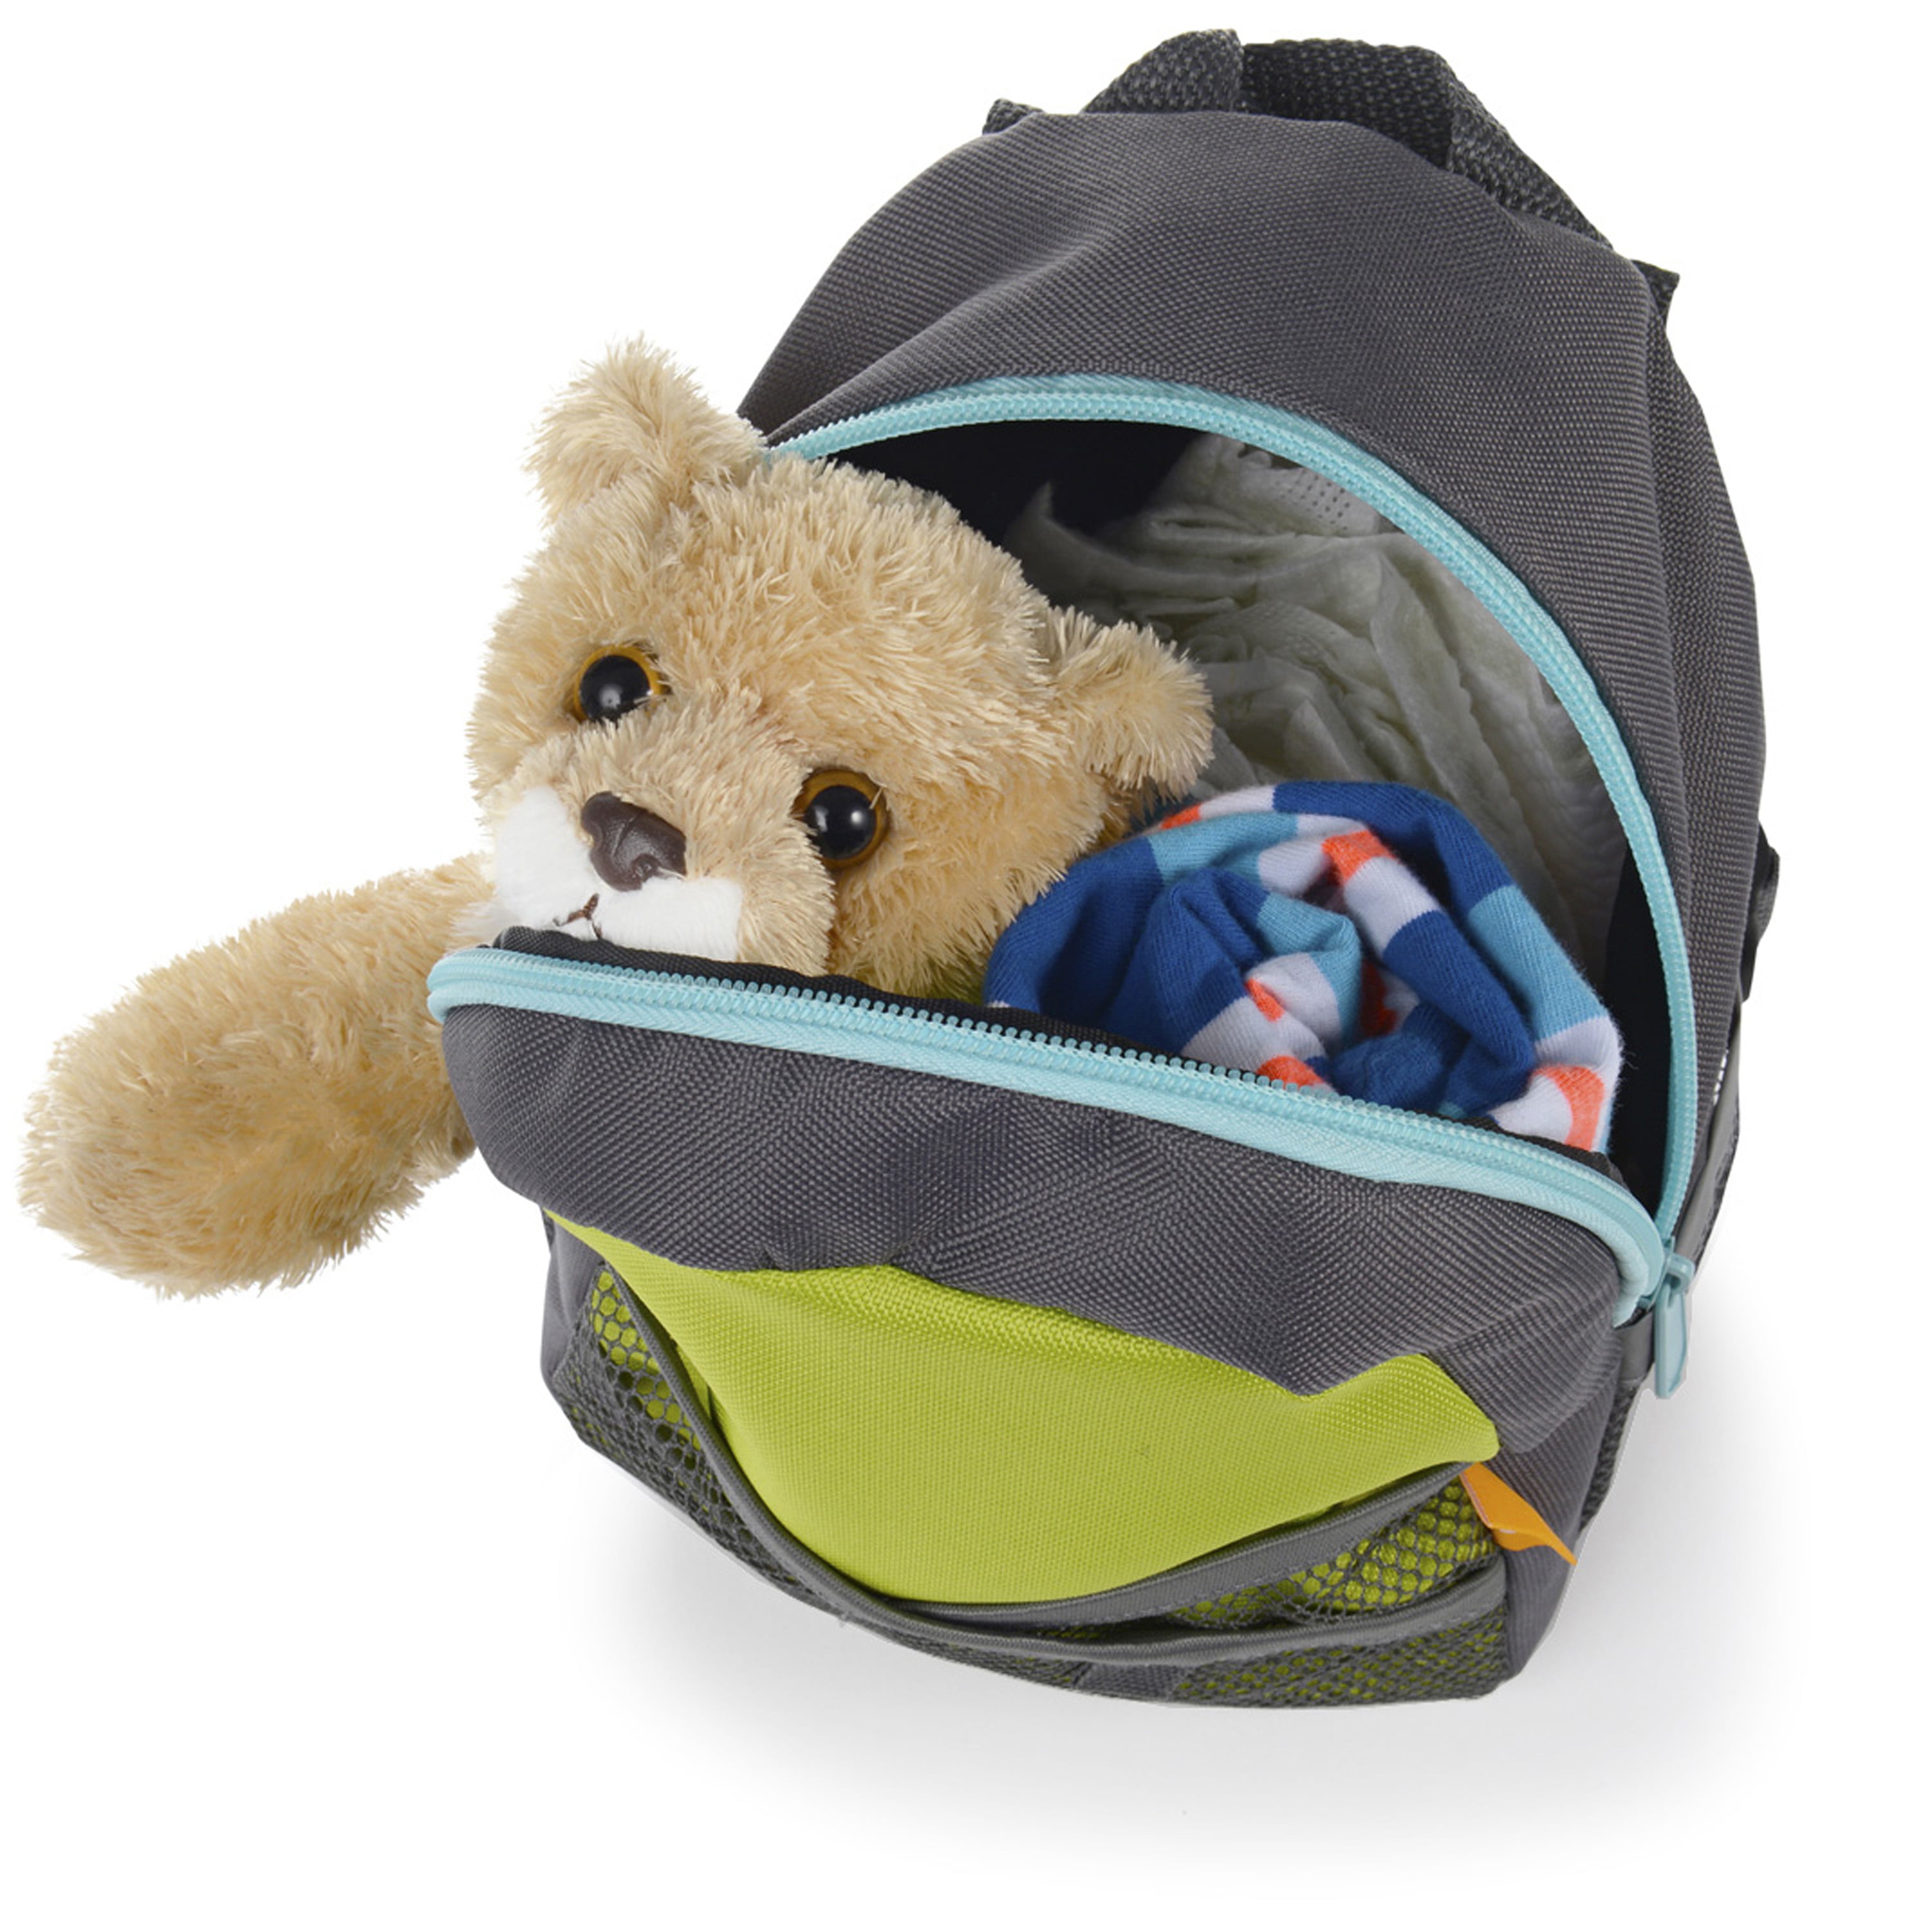 Munchkin Brica By-My-Side Safety Harness Backpack, Includes Adjustable  Chest Clip and Reflective Safety Strip for Nighttime Visibility, Owl